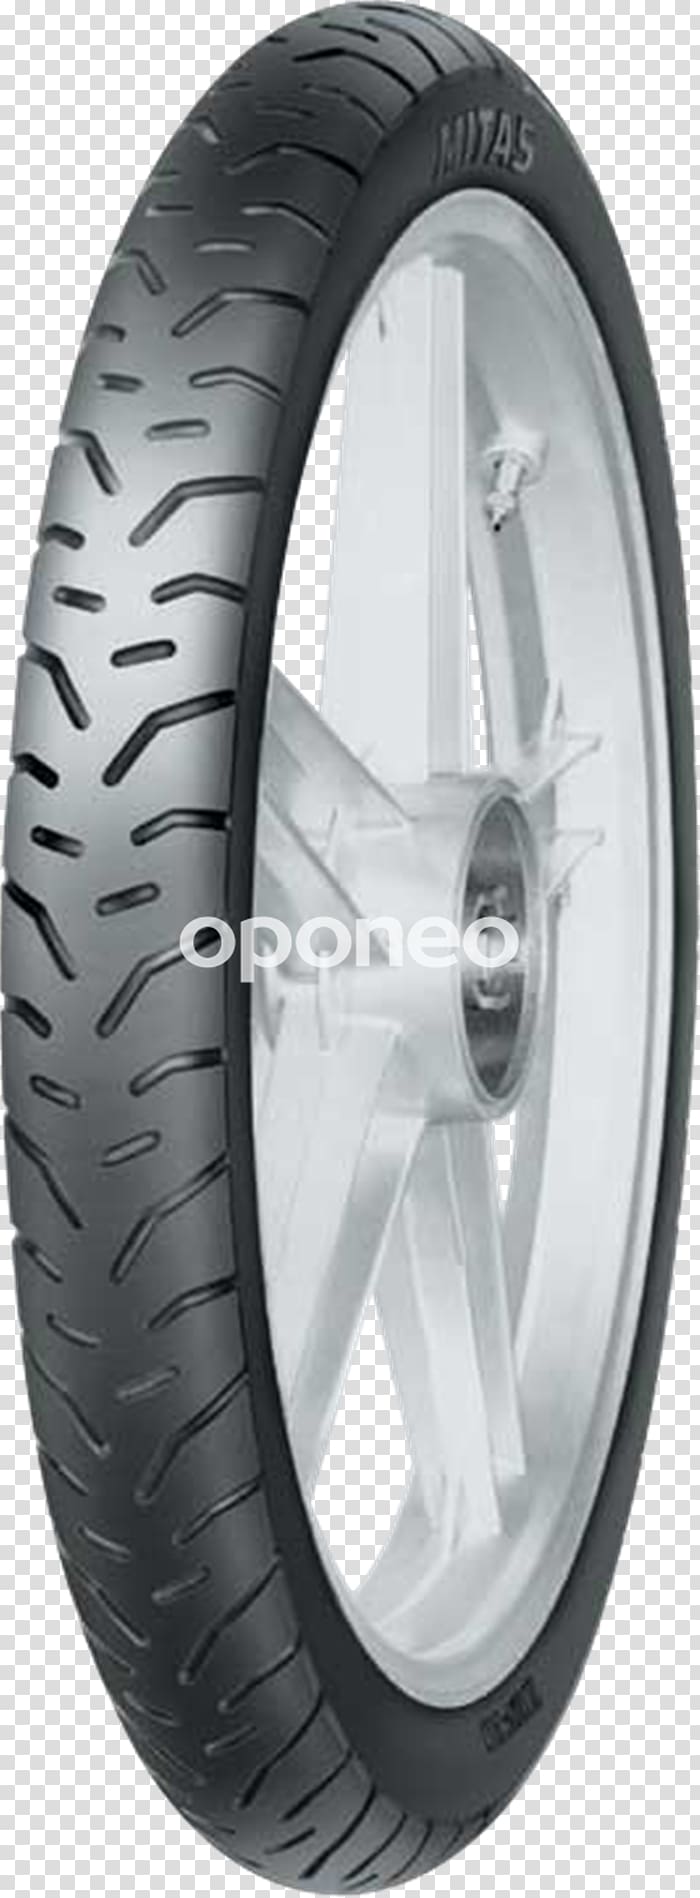 Tread Highway M04 Tire MITAS Highway M02, others transparent background PNG clipart